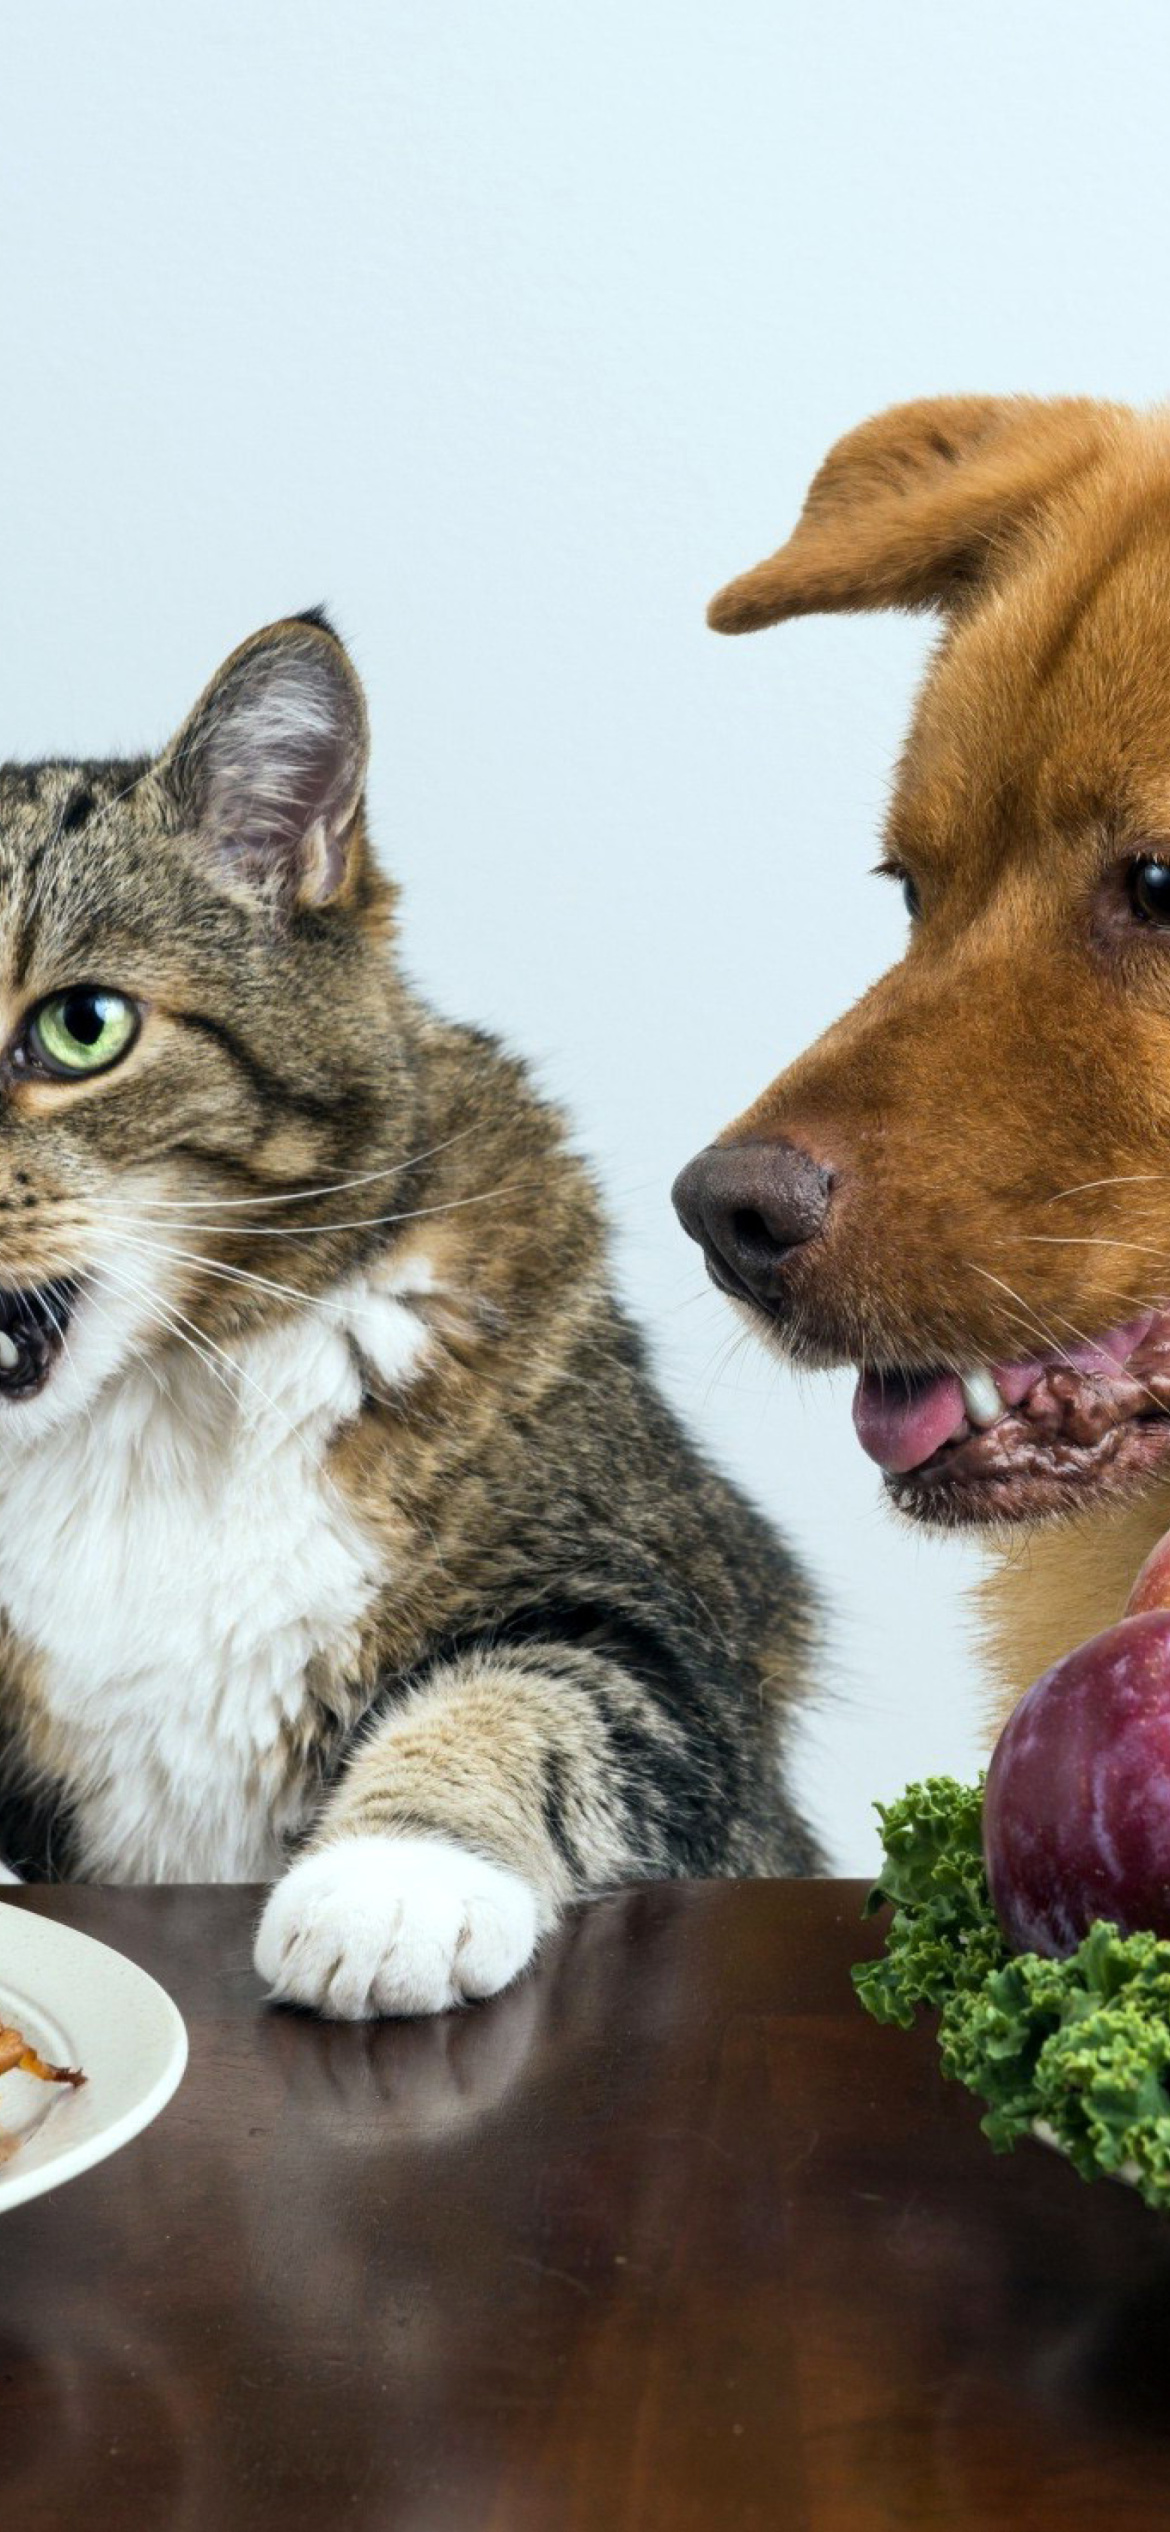 Dog and Cat Dinner wallpaper 1170x2532